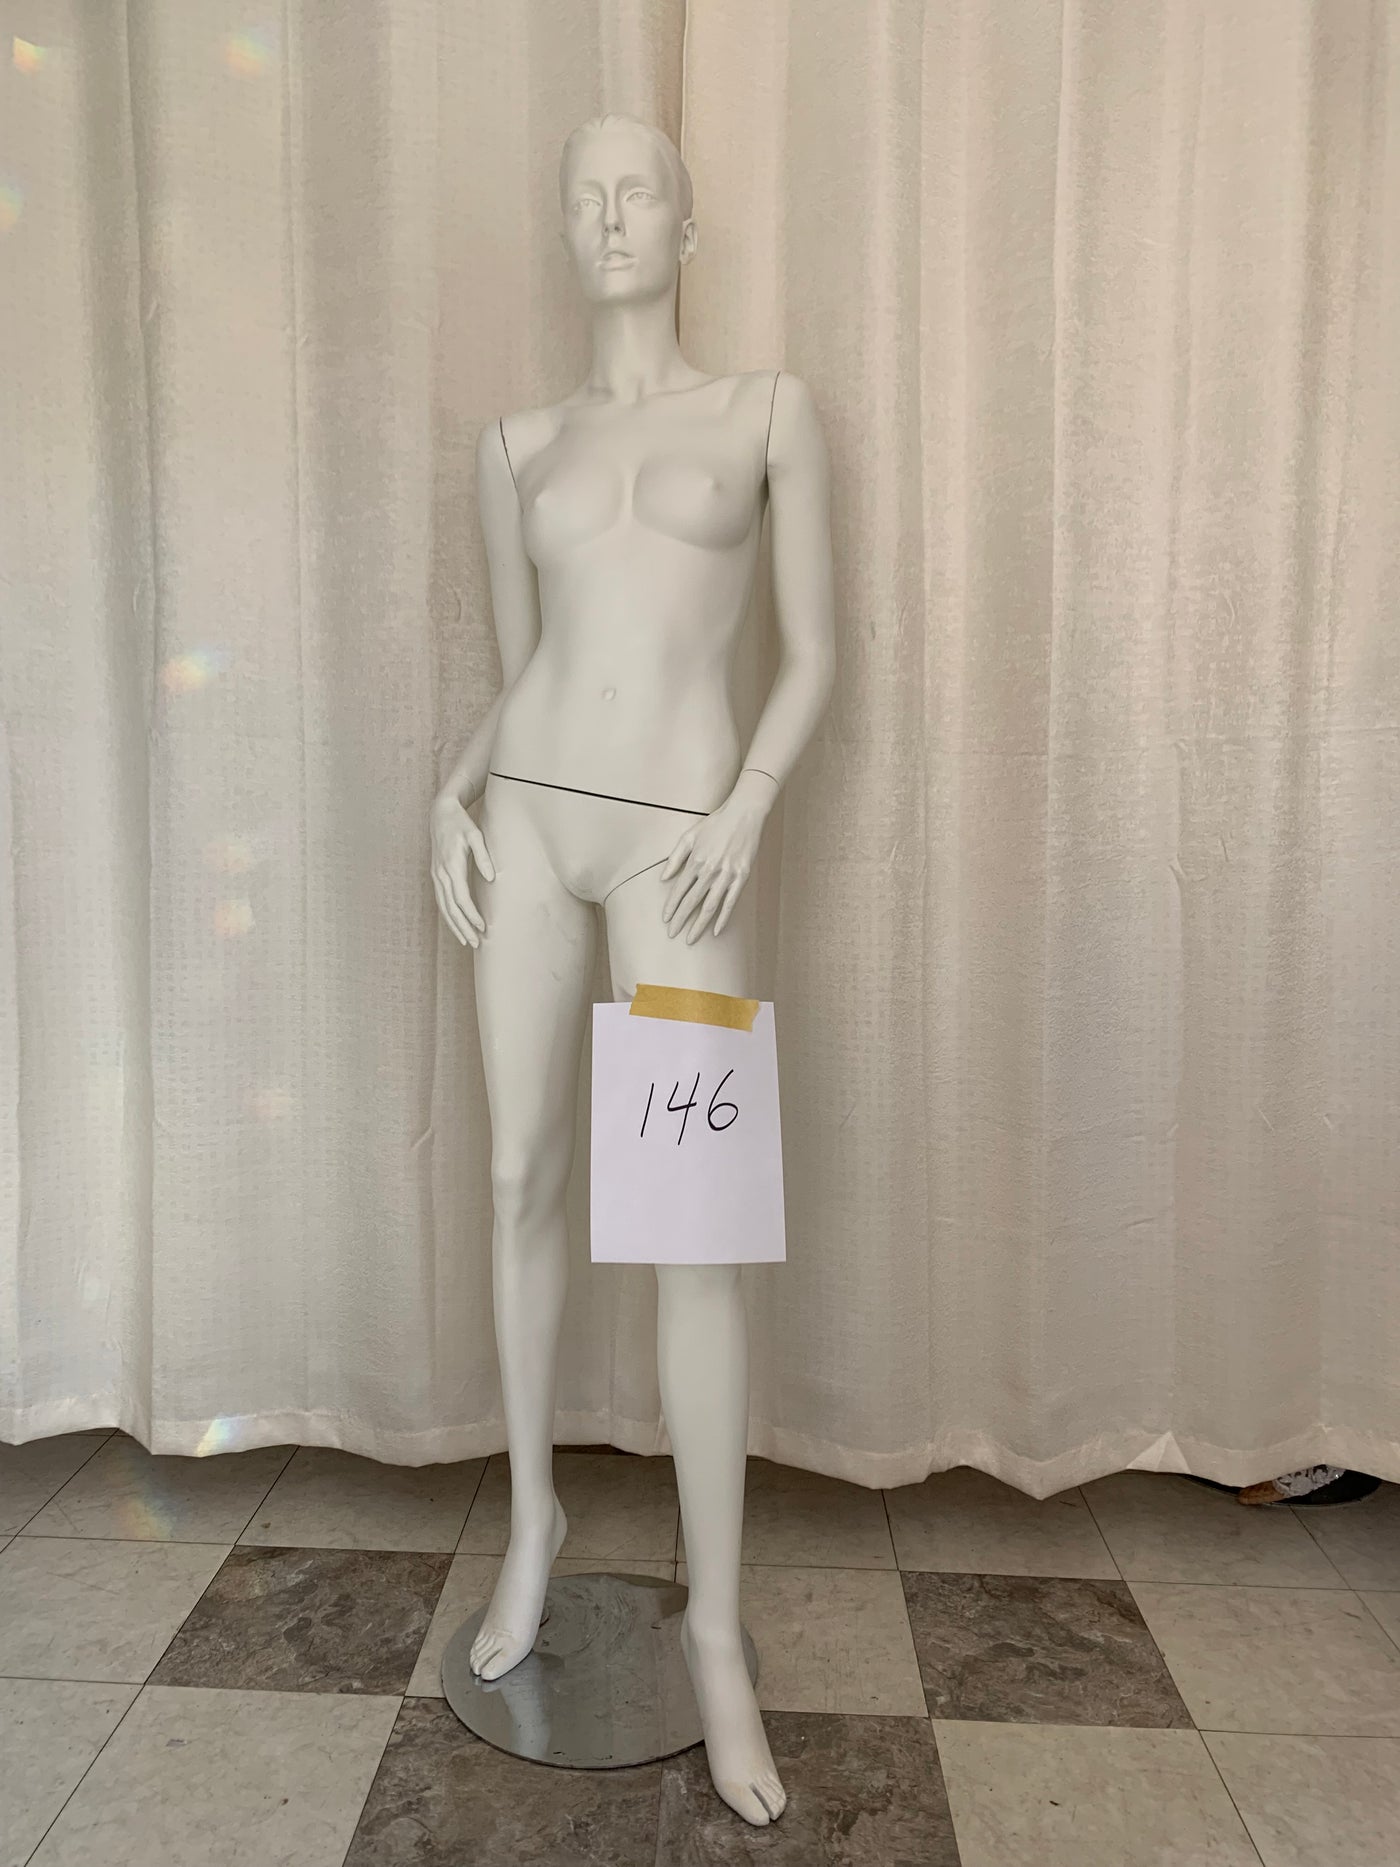 Used Female Adel Rootstein Mannequin #146 - Girl Thing